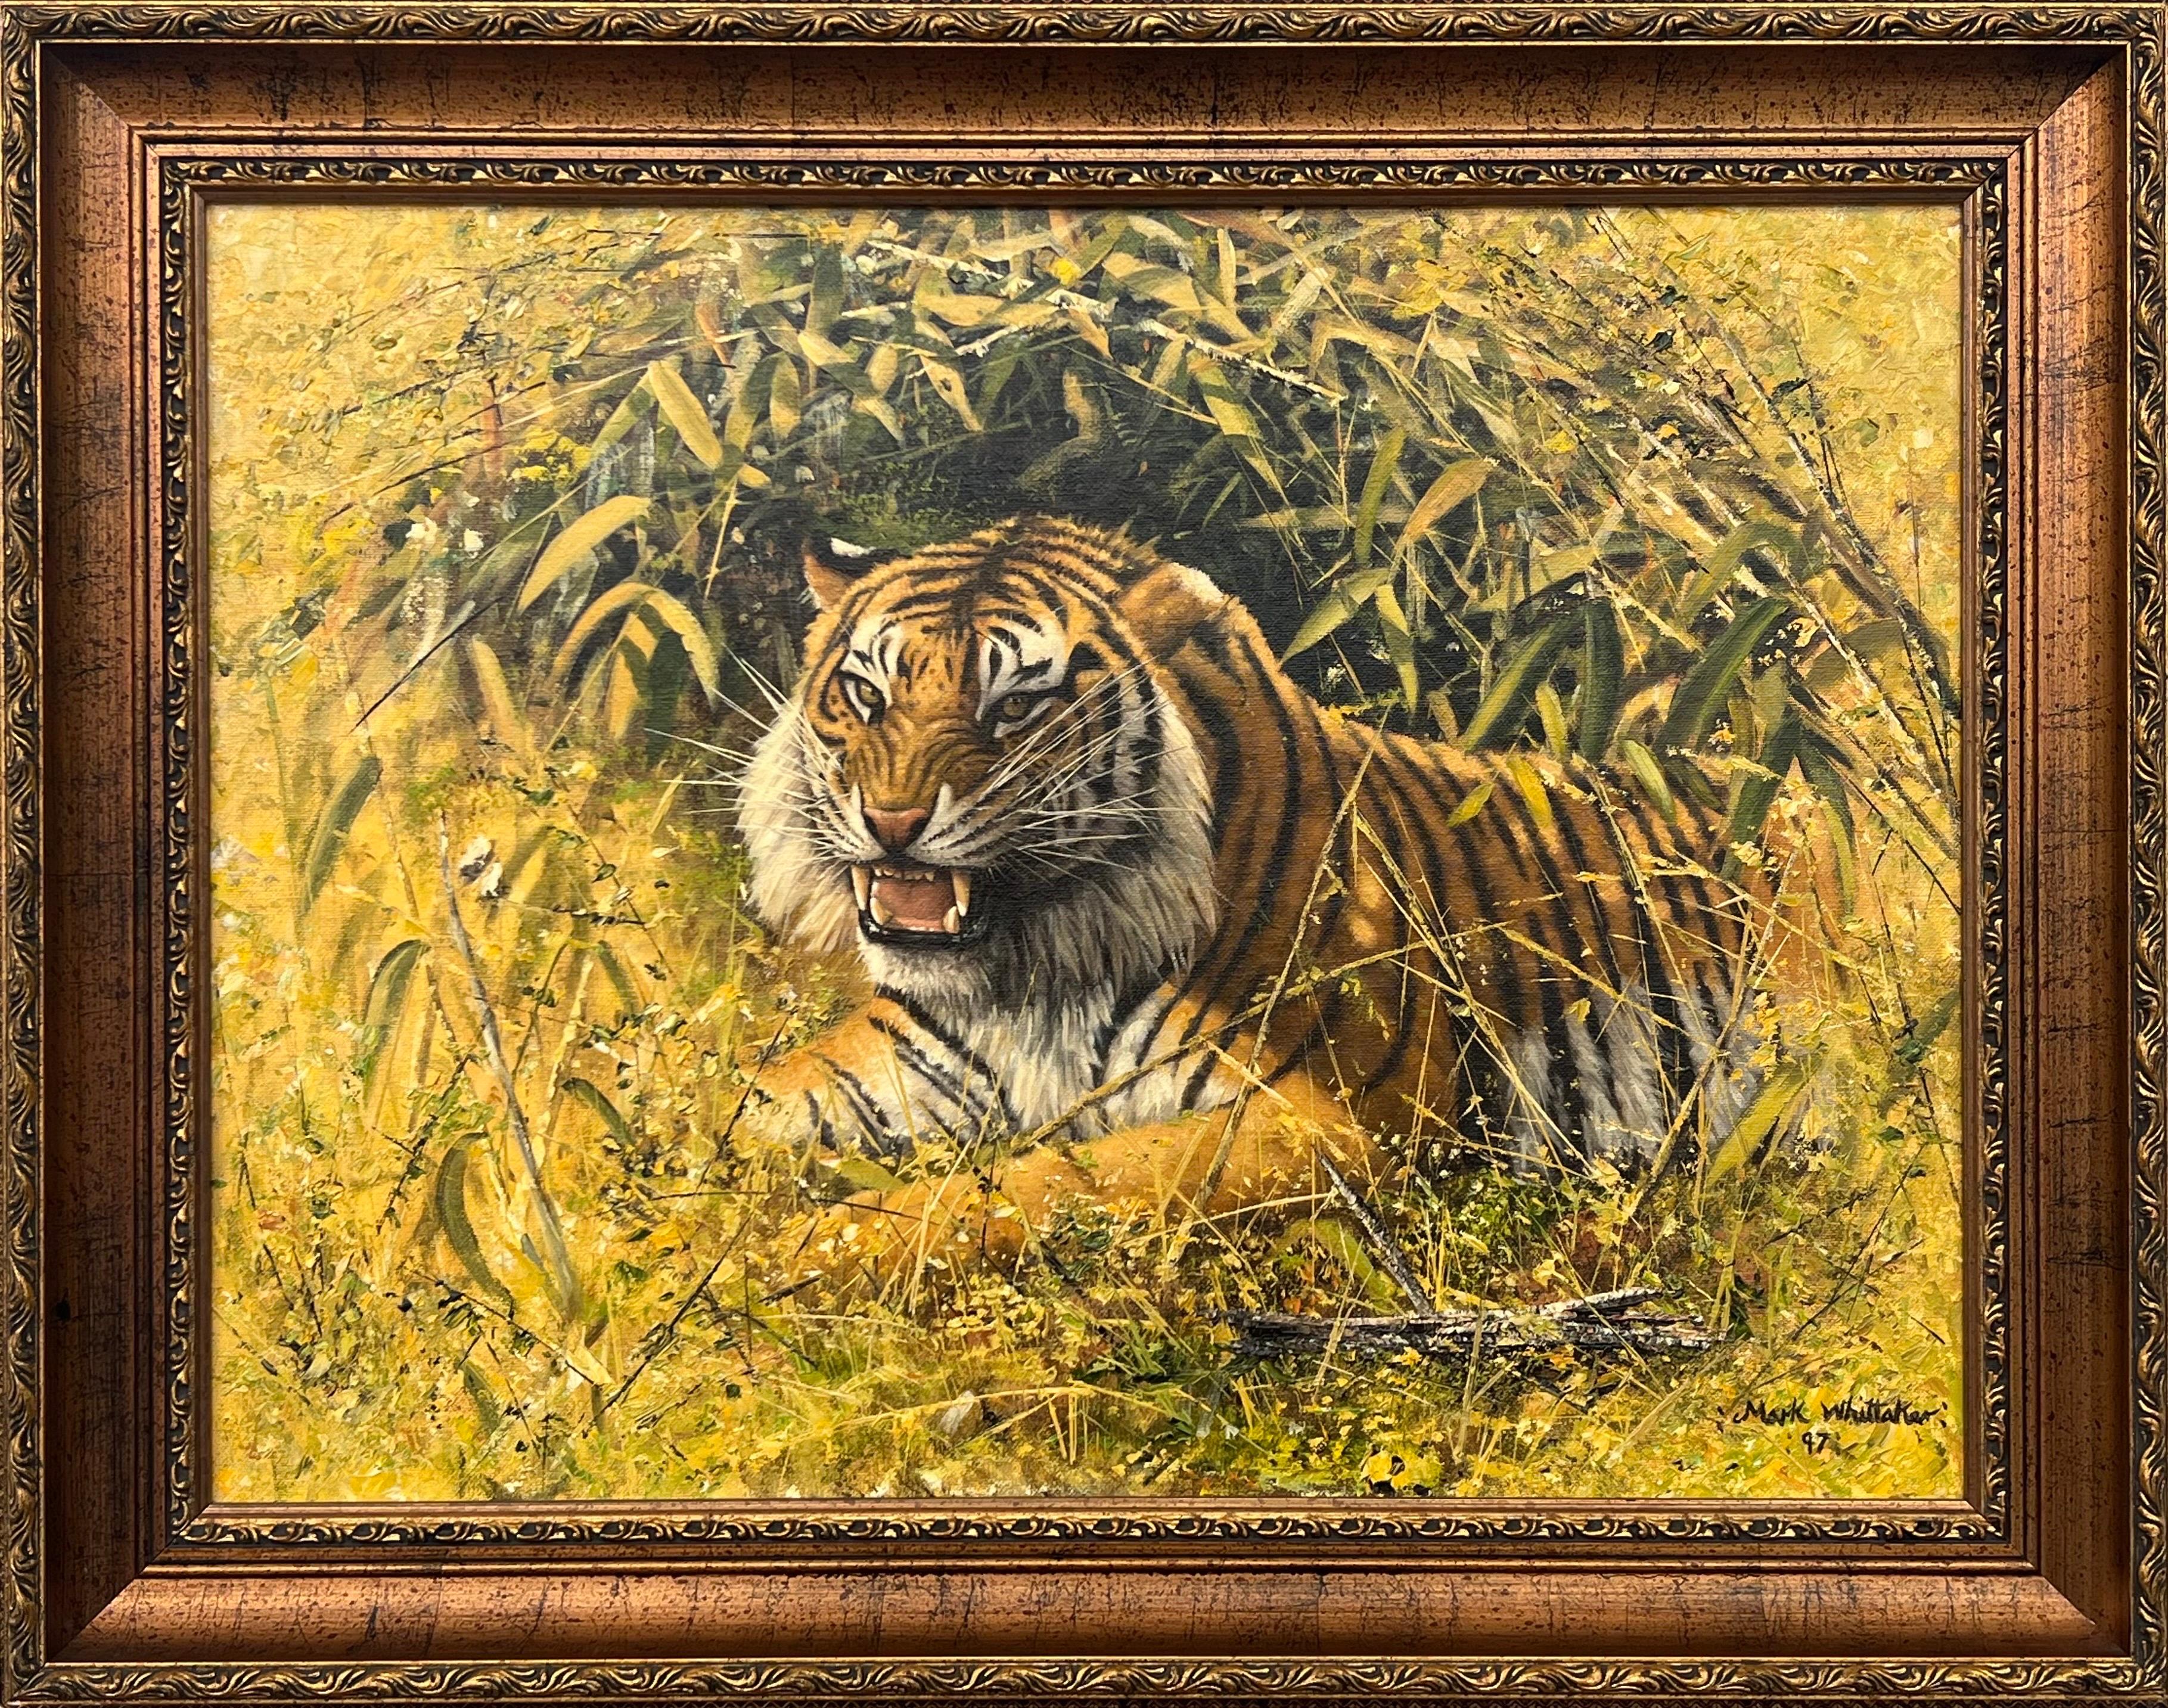 Original Oil Painting of Tiger in the Wild by British Contemporary Artist